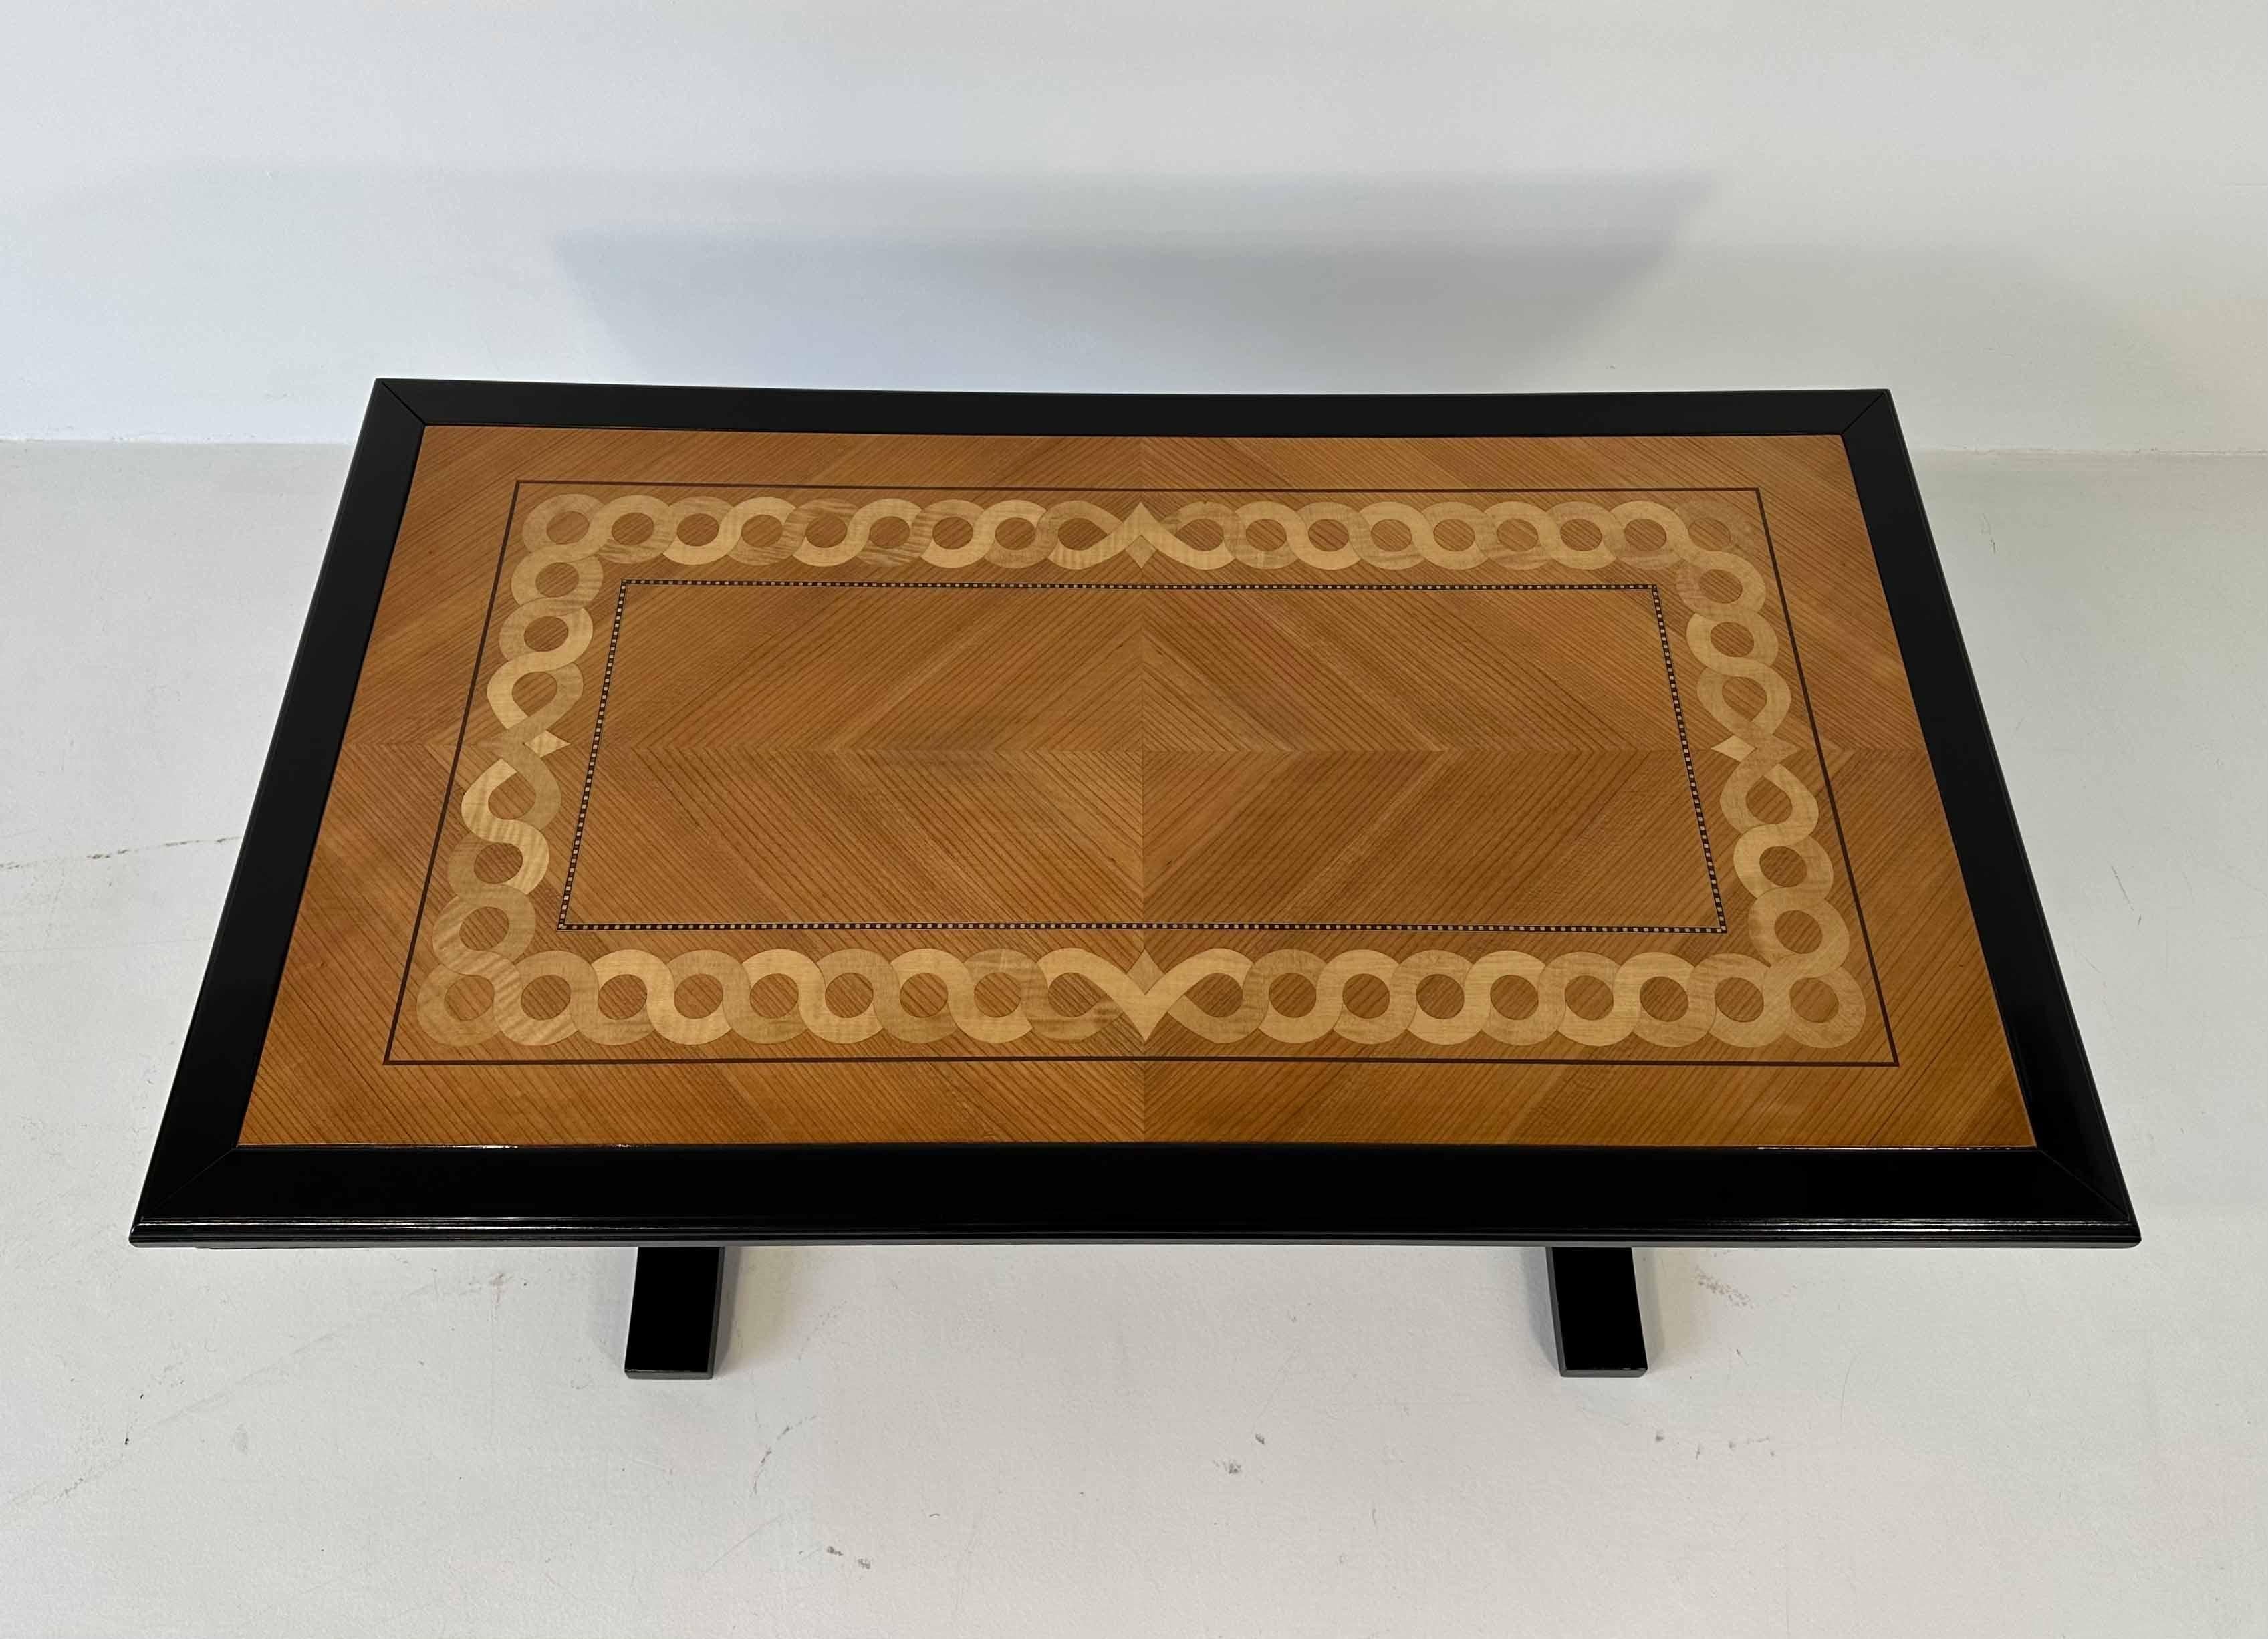 This coffee table was produced in Italy in the 1980s. 
The top is inlaid with different essences of wood, among which there are ash wood and maple. The legs and the carved lateral profiles are ebonized. 
The tube that connects the two legs is in